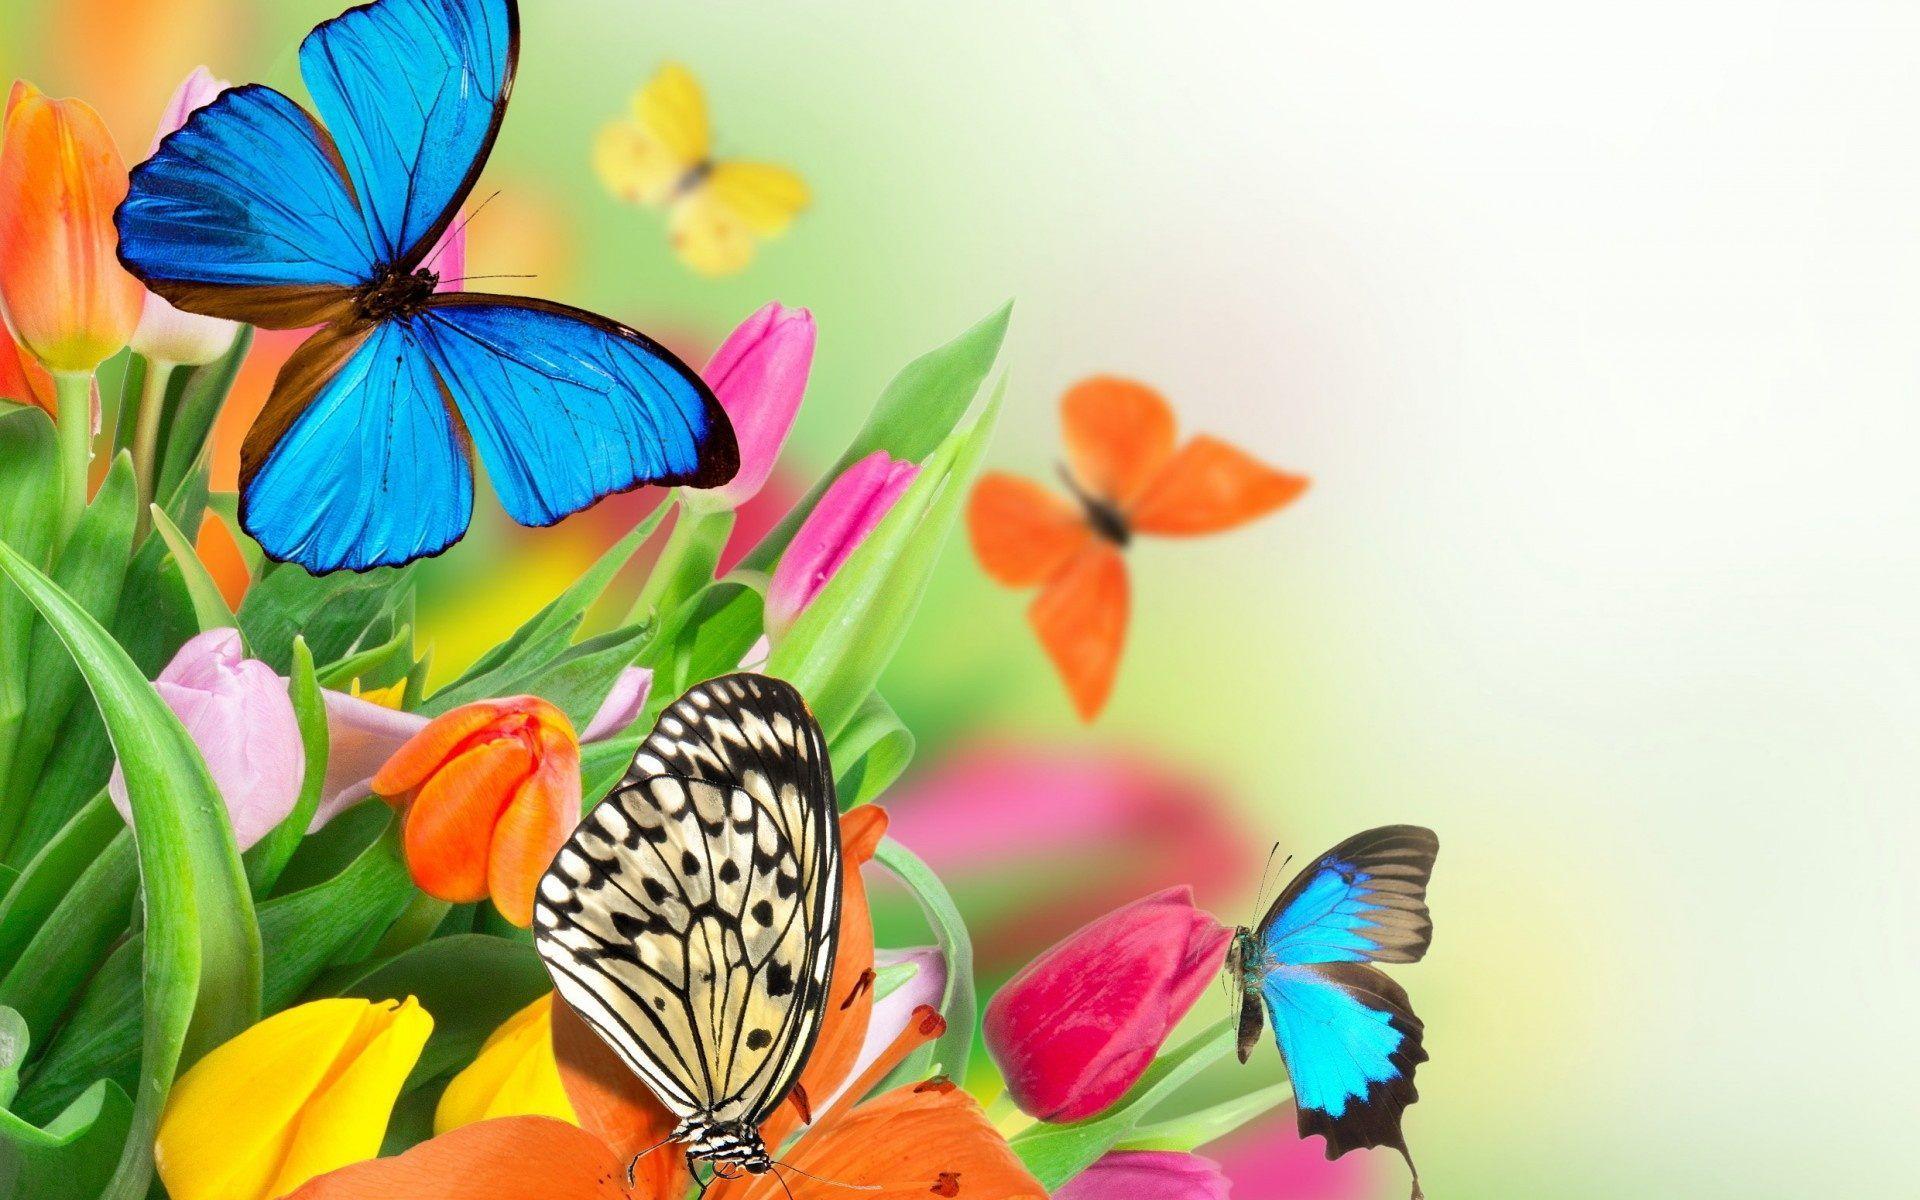 Butterfly Colorful Butterfly Background Wallpaper Wpc5003434